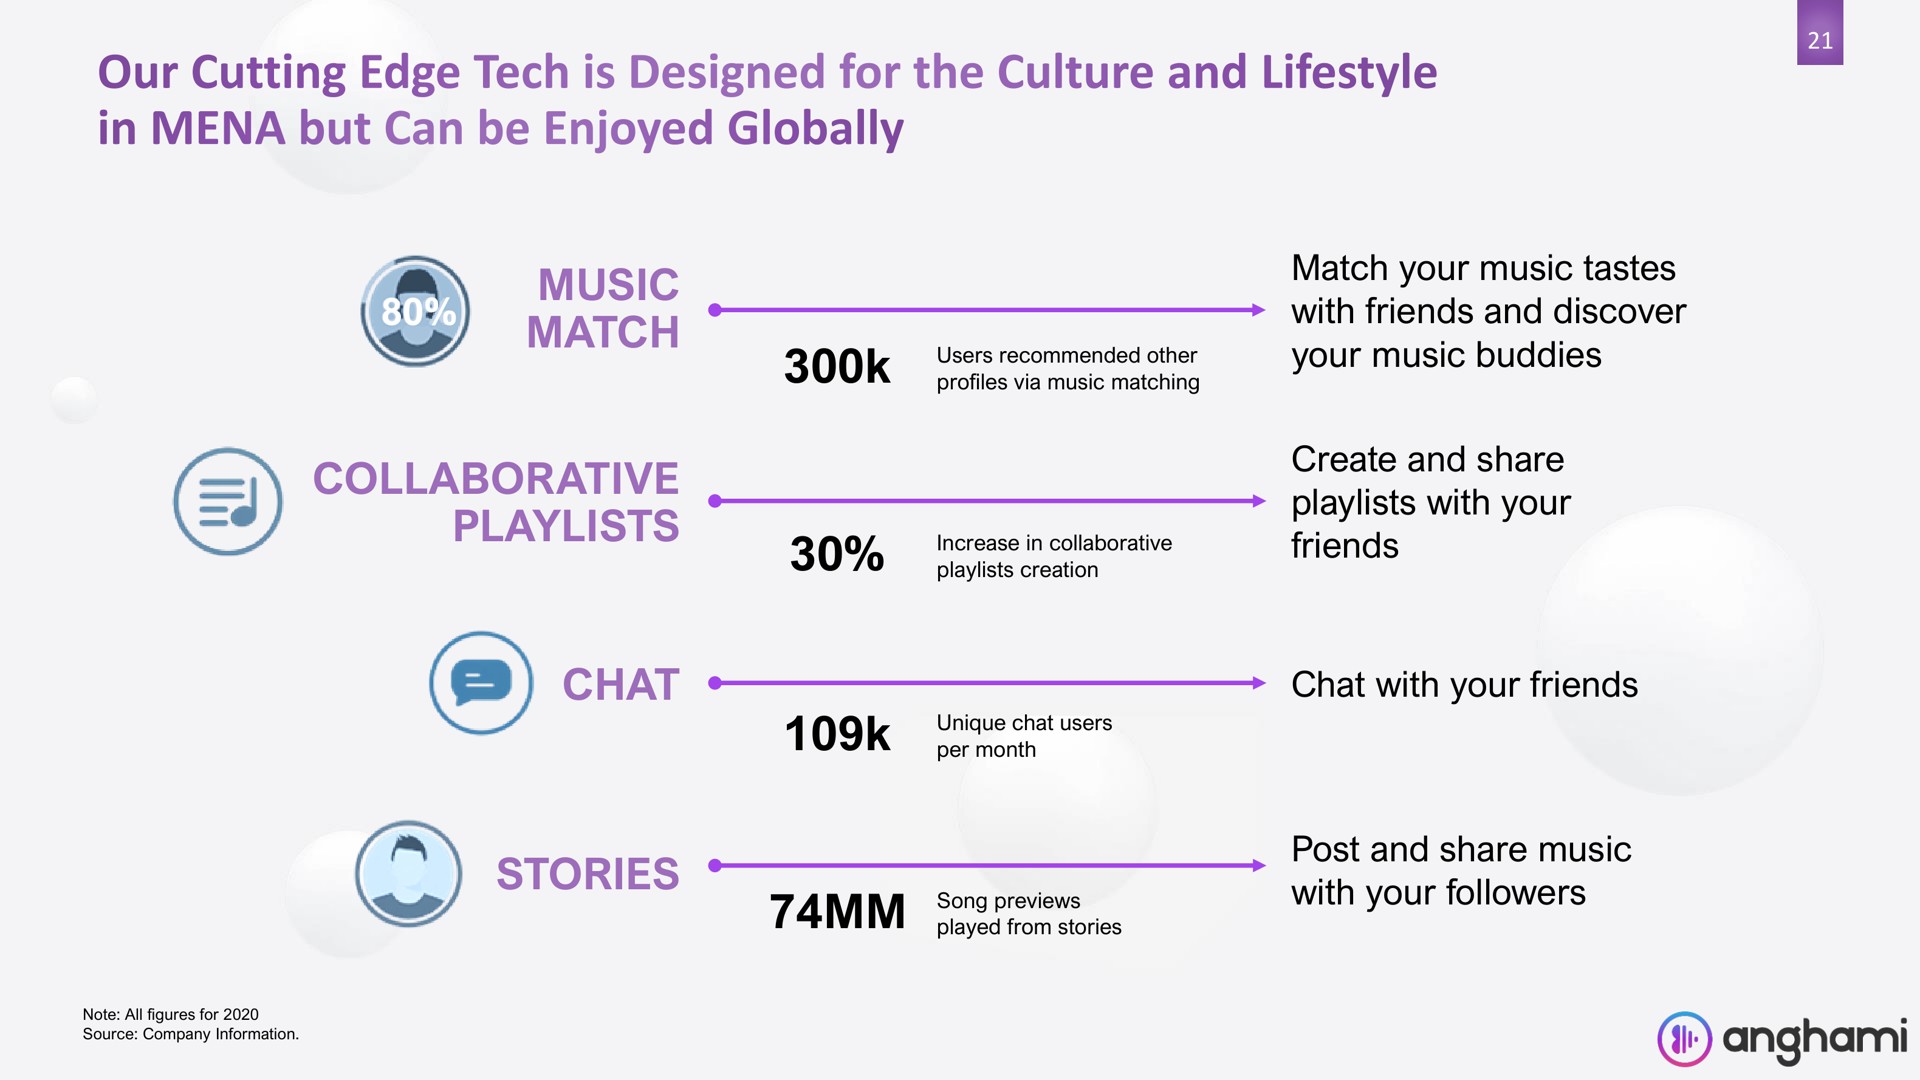 music match collaborative chat stories our cutting edge tech is designed for the culture and in but can be enjoyed globally with your followers | Anghami